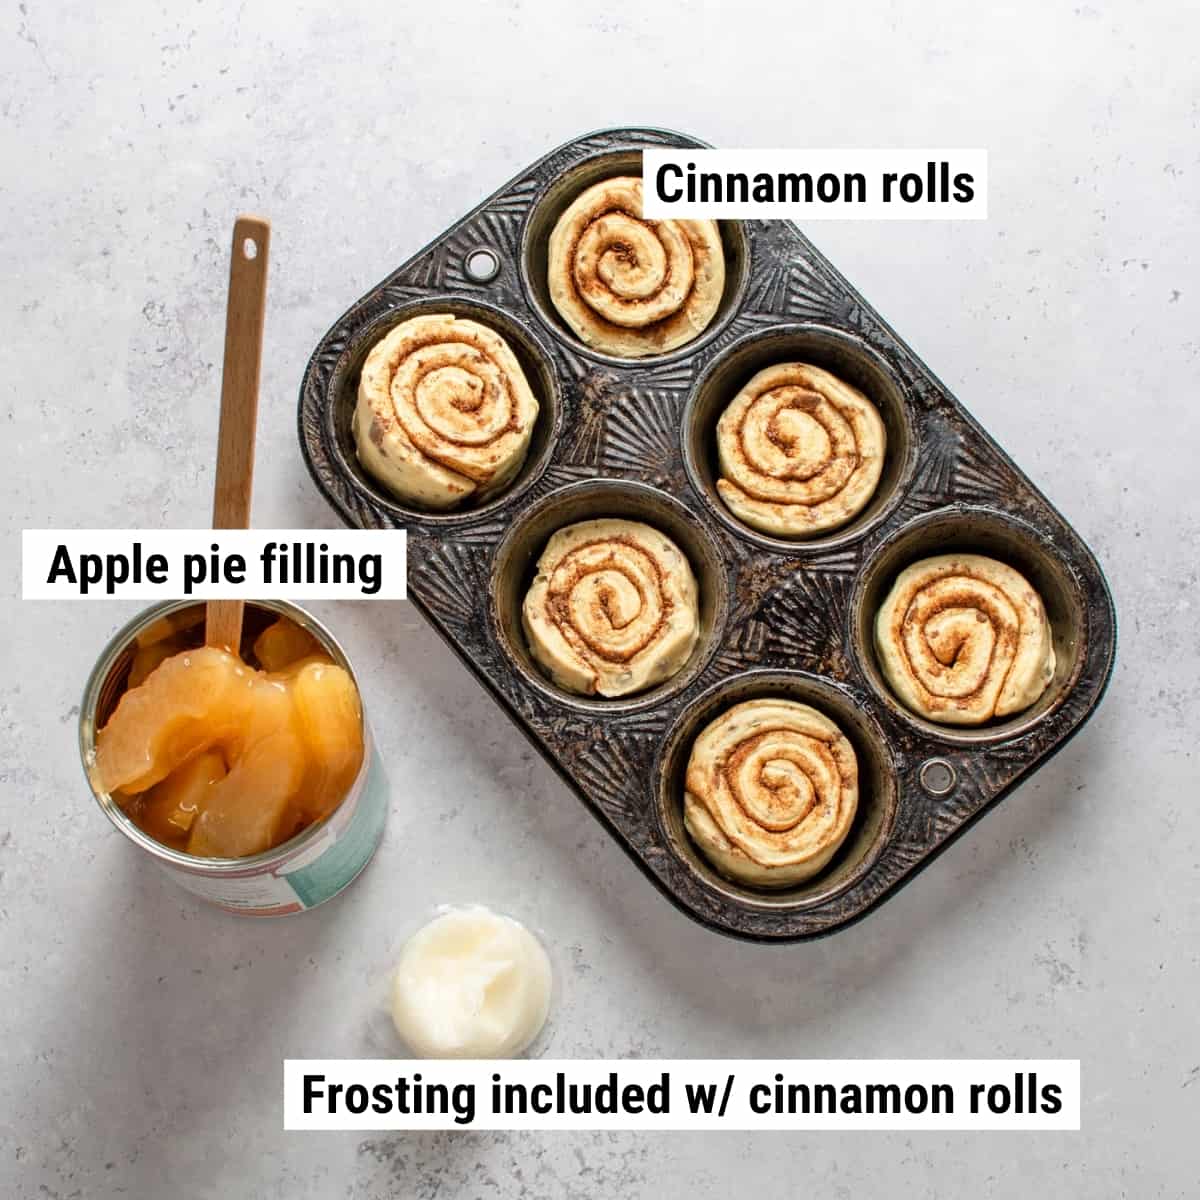 The ingredients used to make cinnamon roll apple pie cups spread out on a table.